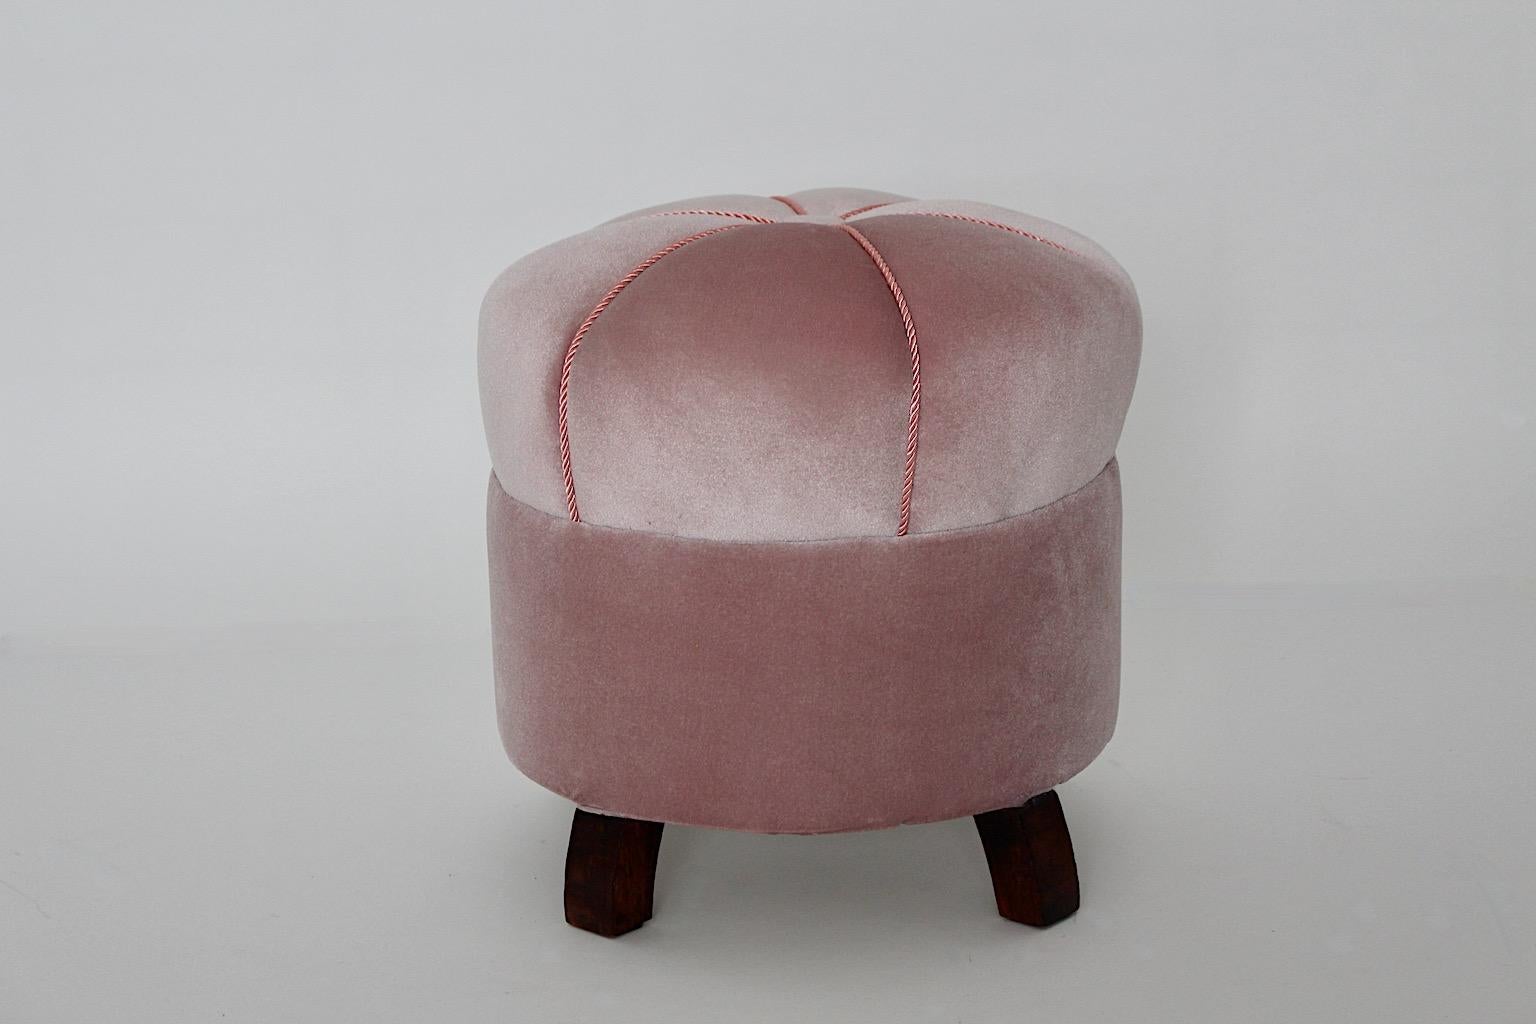 Art Deco vintage circular pouf, stool or ottoman new upholstered and covered with soft pink velvet fabric 1930s Austria.
A stunning and elegant stool or pouf new upholstered and covered with feminine elegant soft pink velvet fabric. One decor button